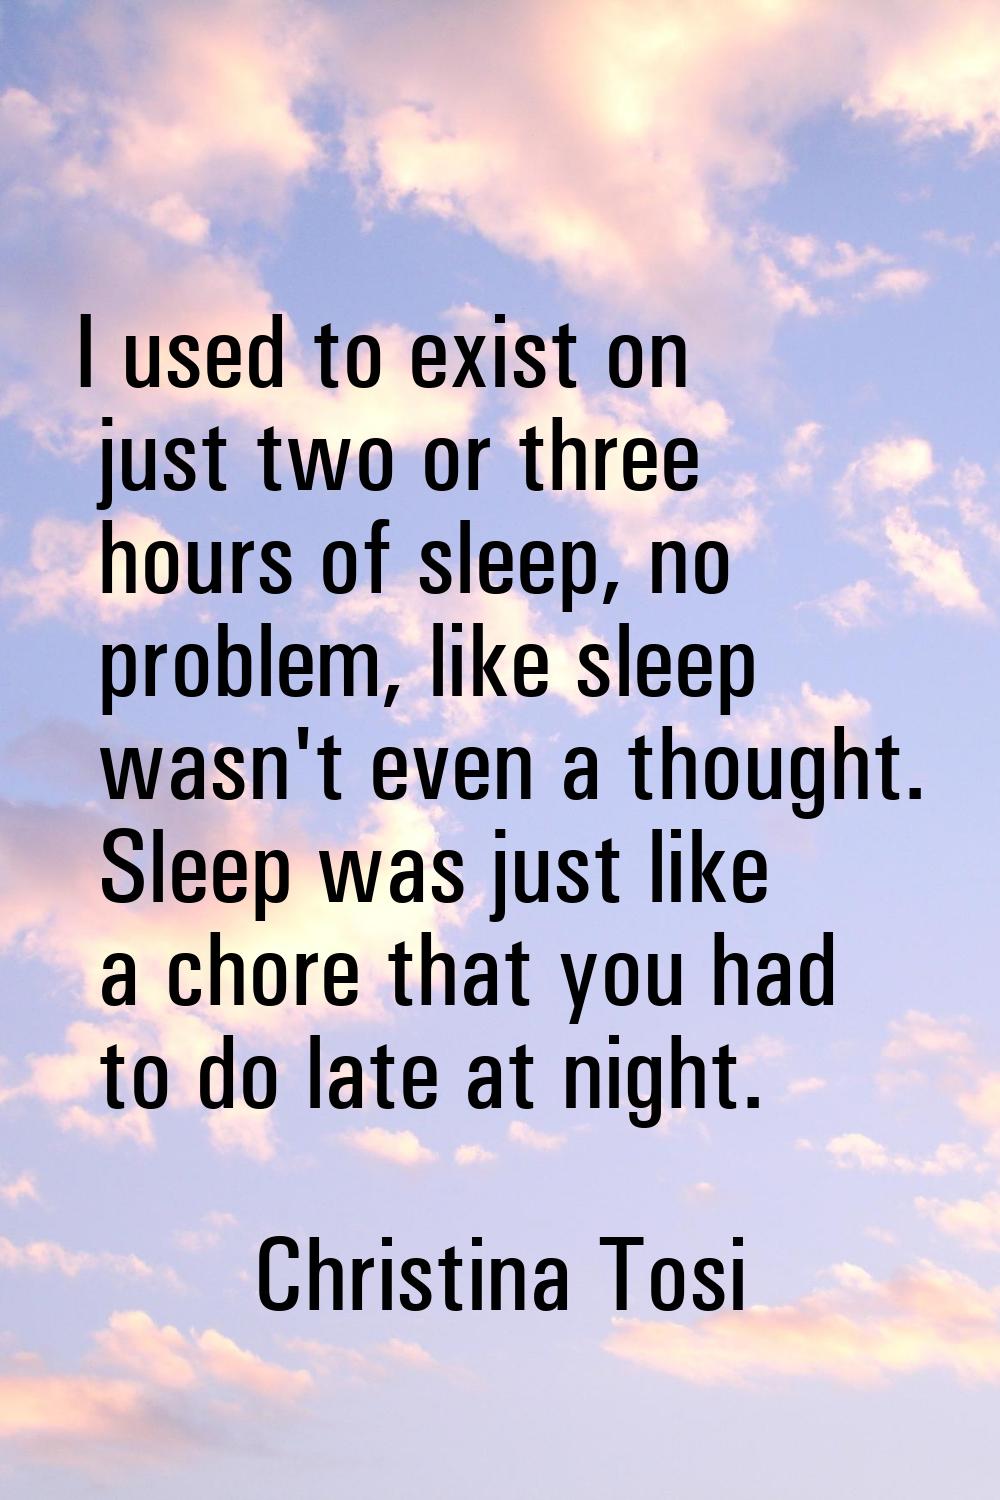 I used to exist on just two or three hours of sleep, no problem, like sleep wasn't even a thought. 